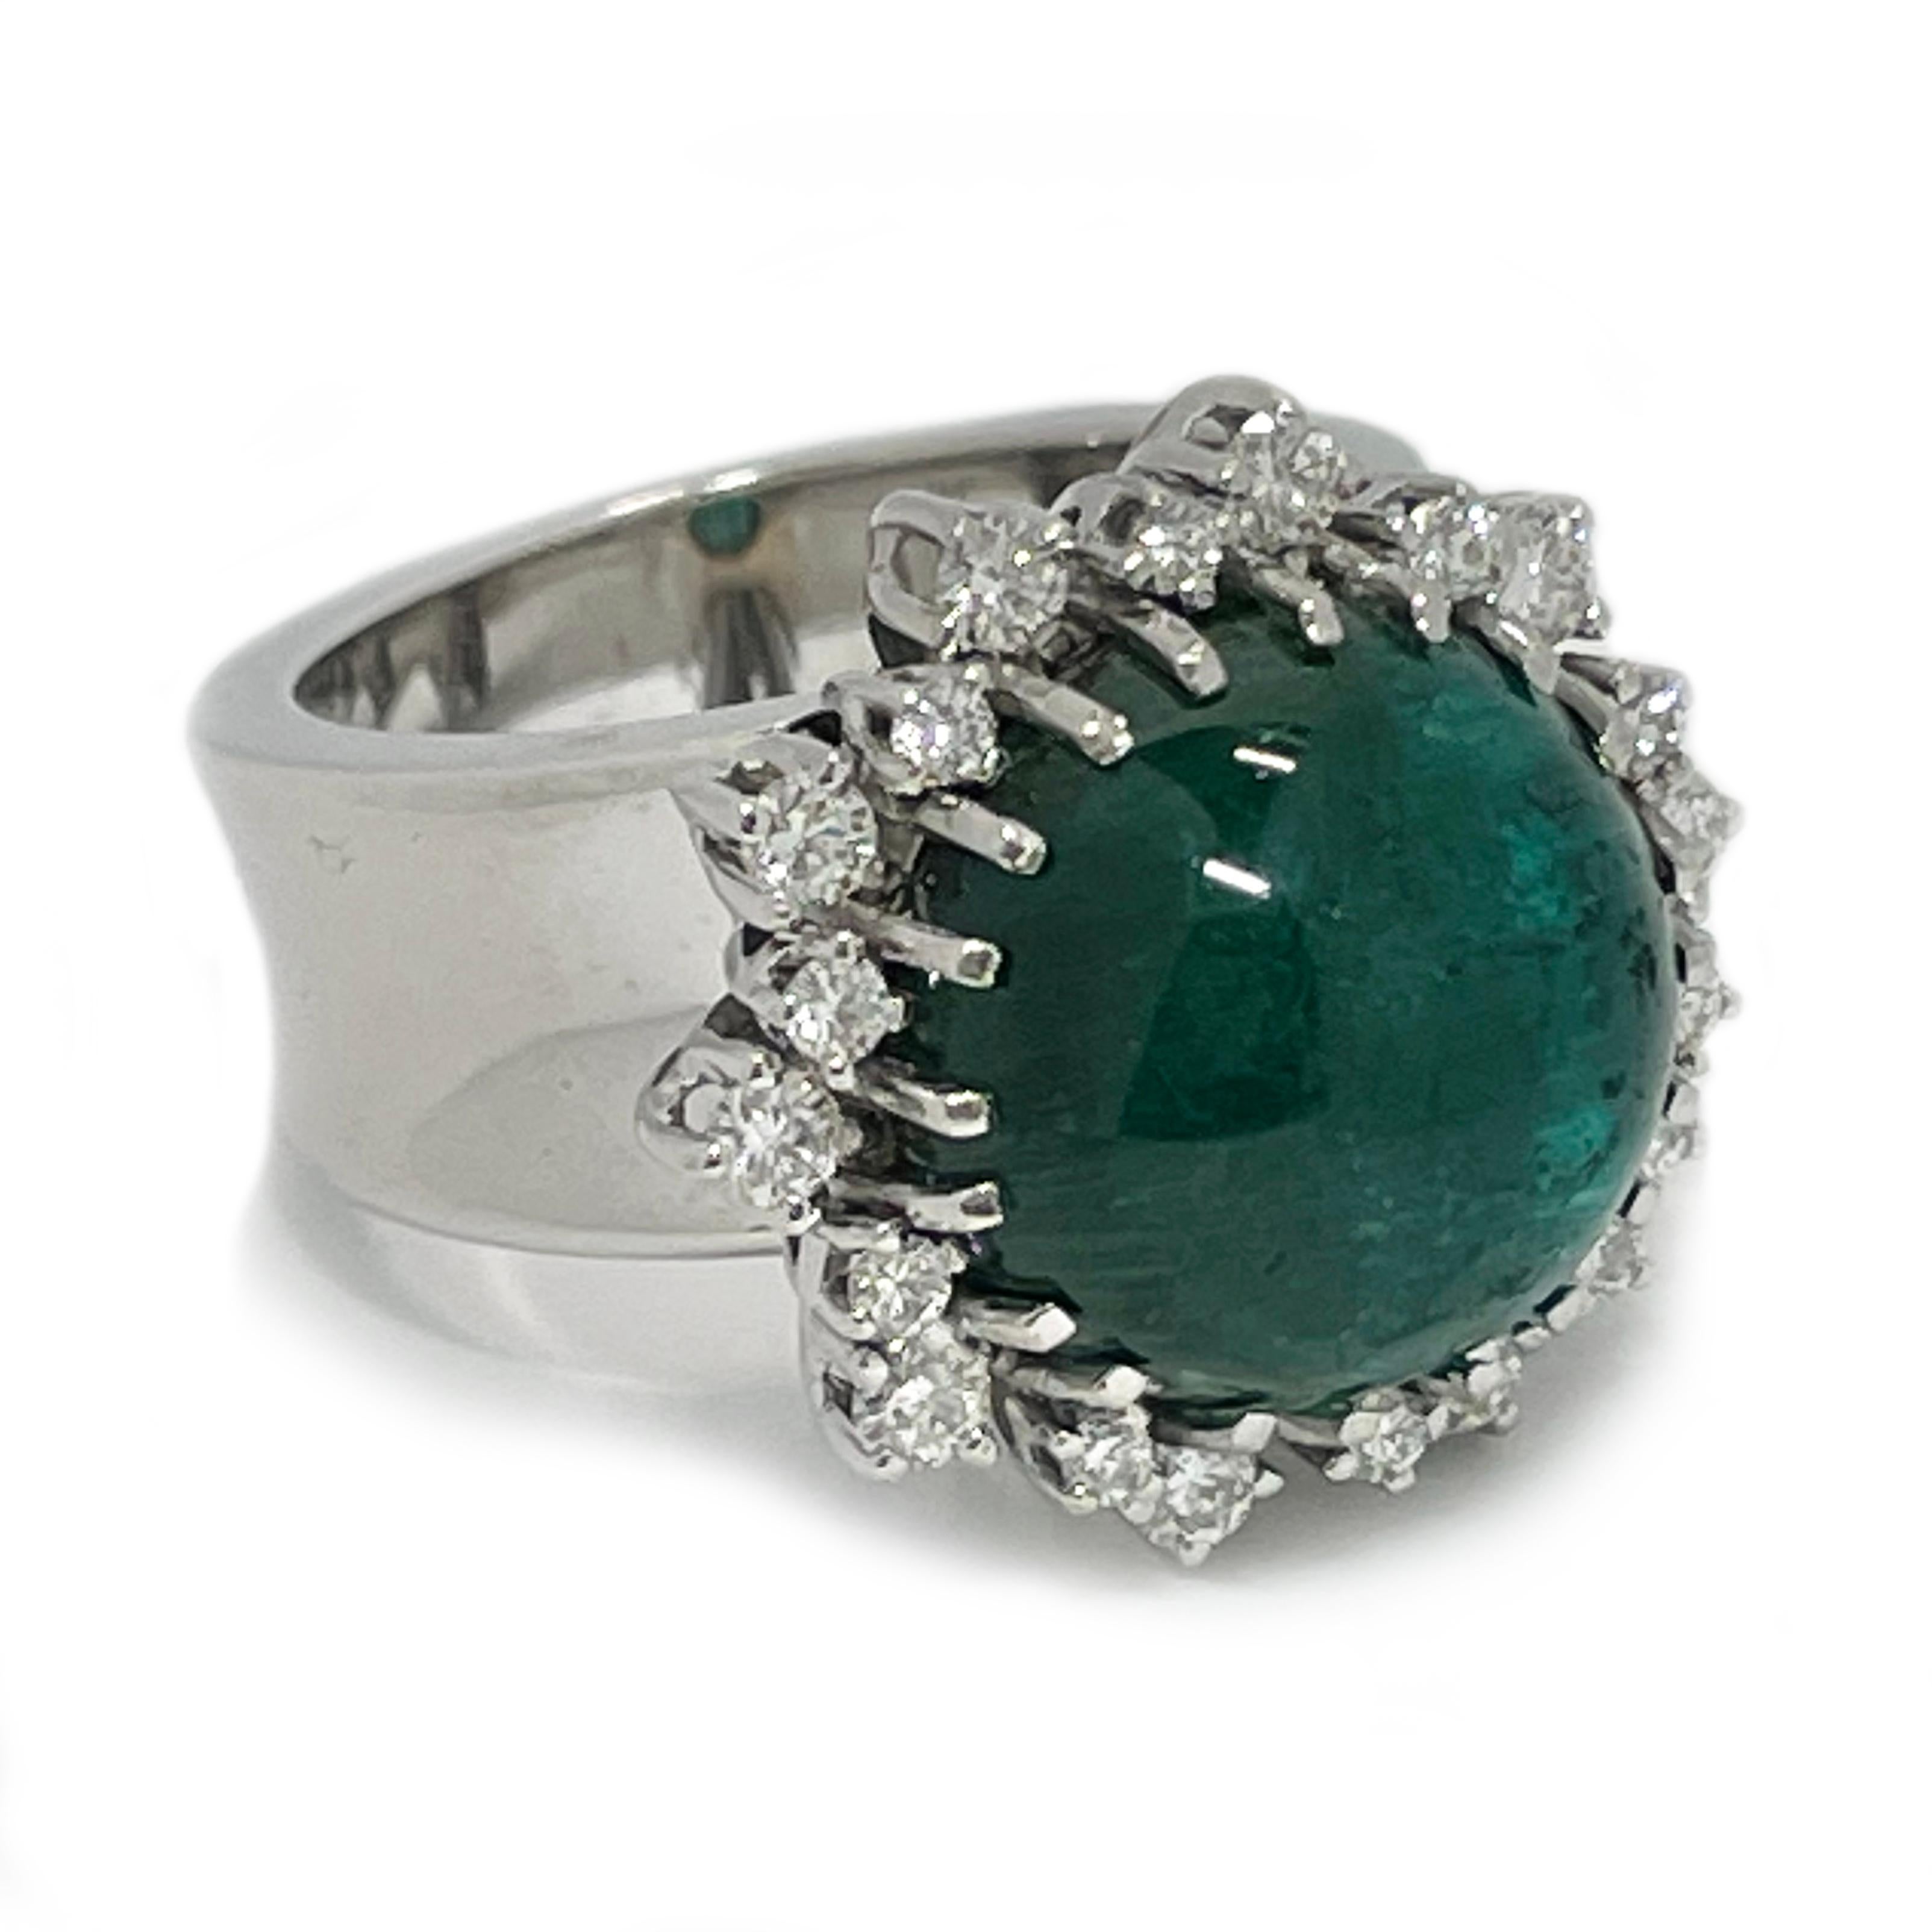 14 Karat Round Cat’s Eye Green Tourmaline Diamond Cocktail Ring. The Green Tourmaline is 14mm and has a  carat weight of 12.20ct. The beautiful green hued stone is prong-set against 14k white gold. Prominent single band cat's eye when light hits the